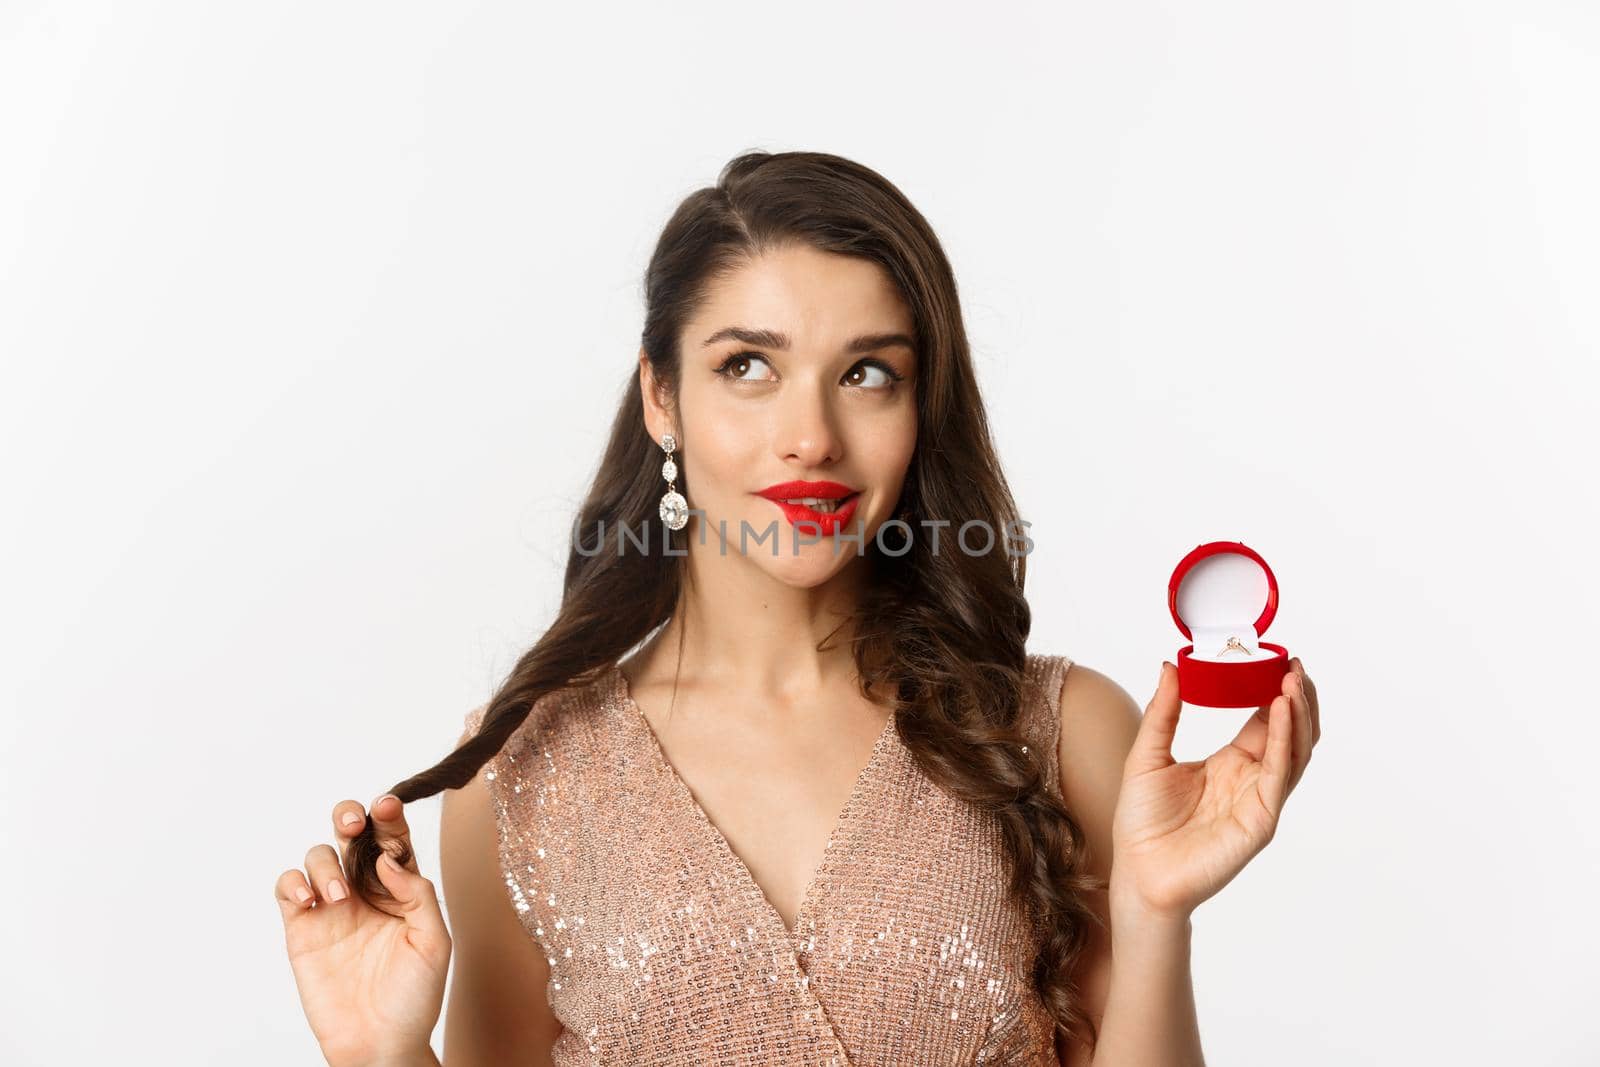 Close-up of coquettish beautiful woman thinking about marriage, holding engagement ring and looking at upper left corner, smiling silly, white background.